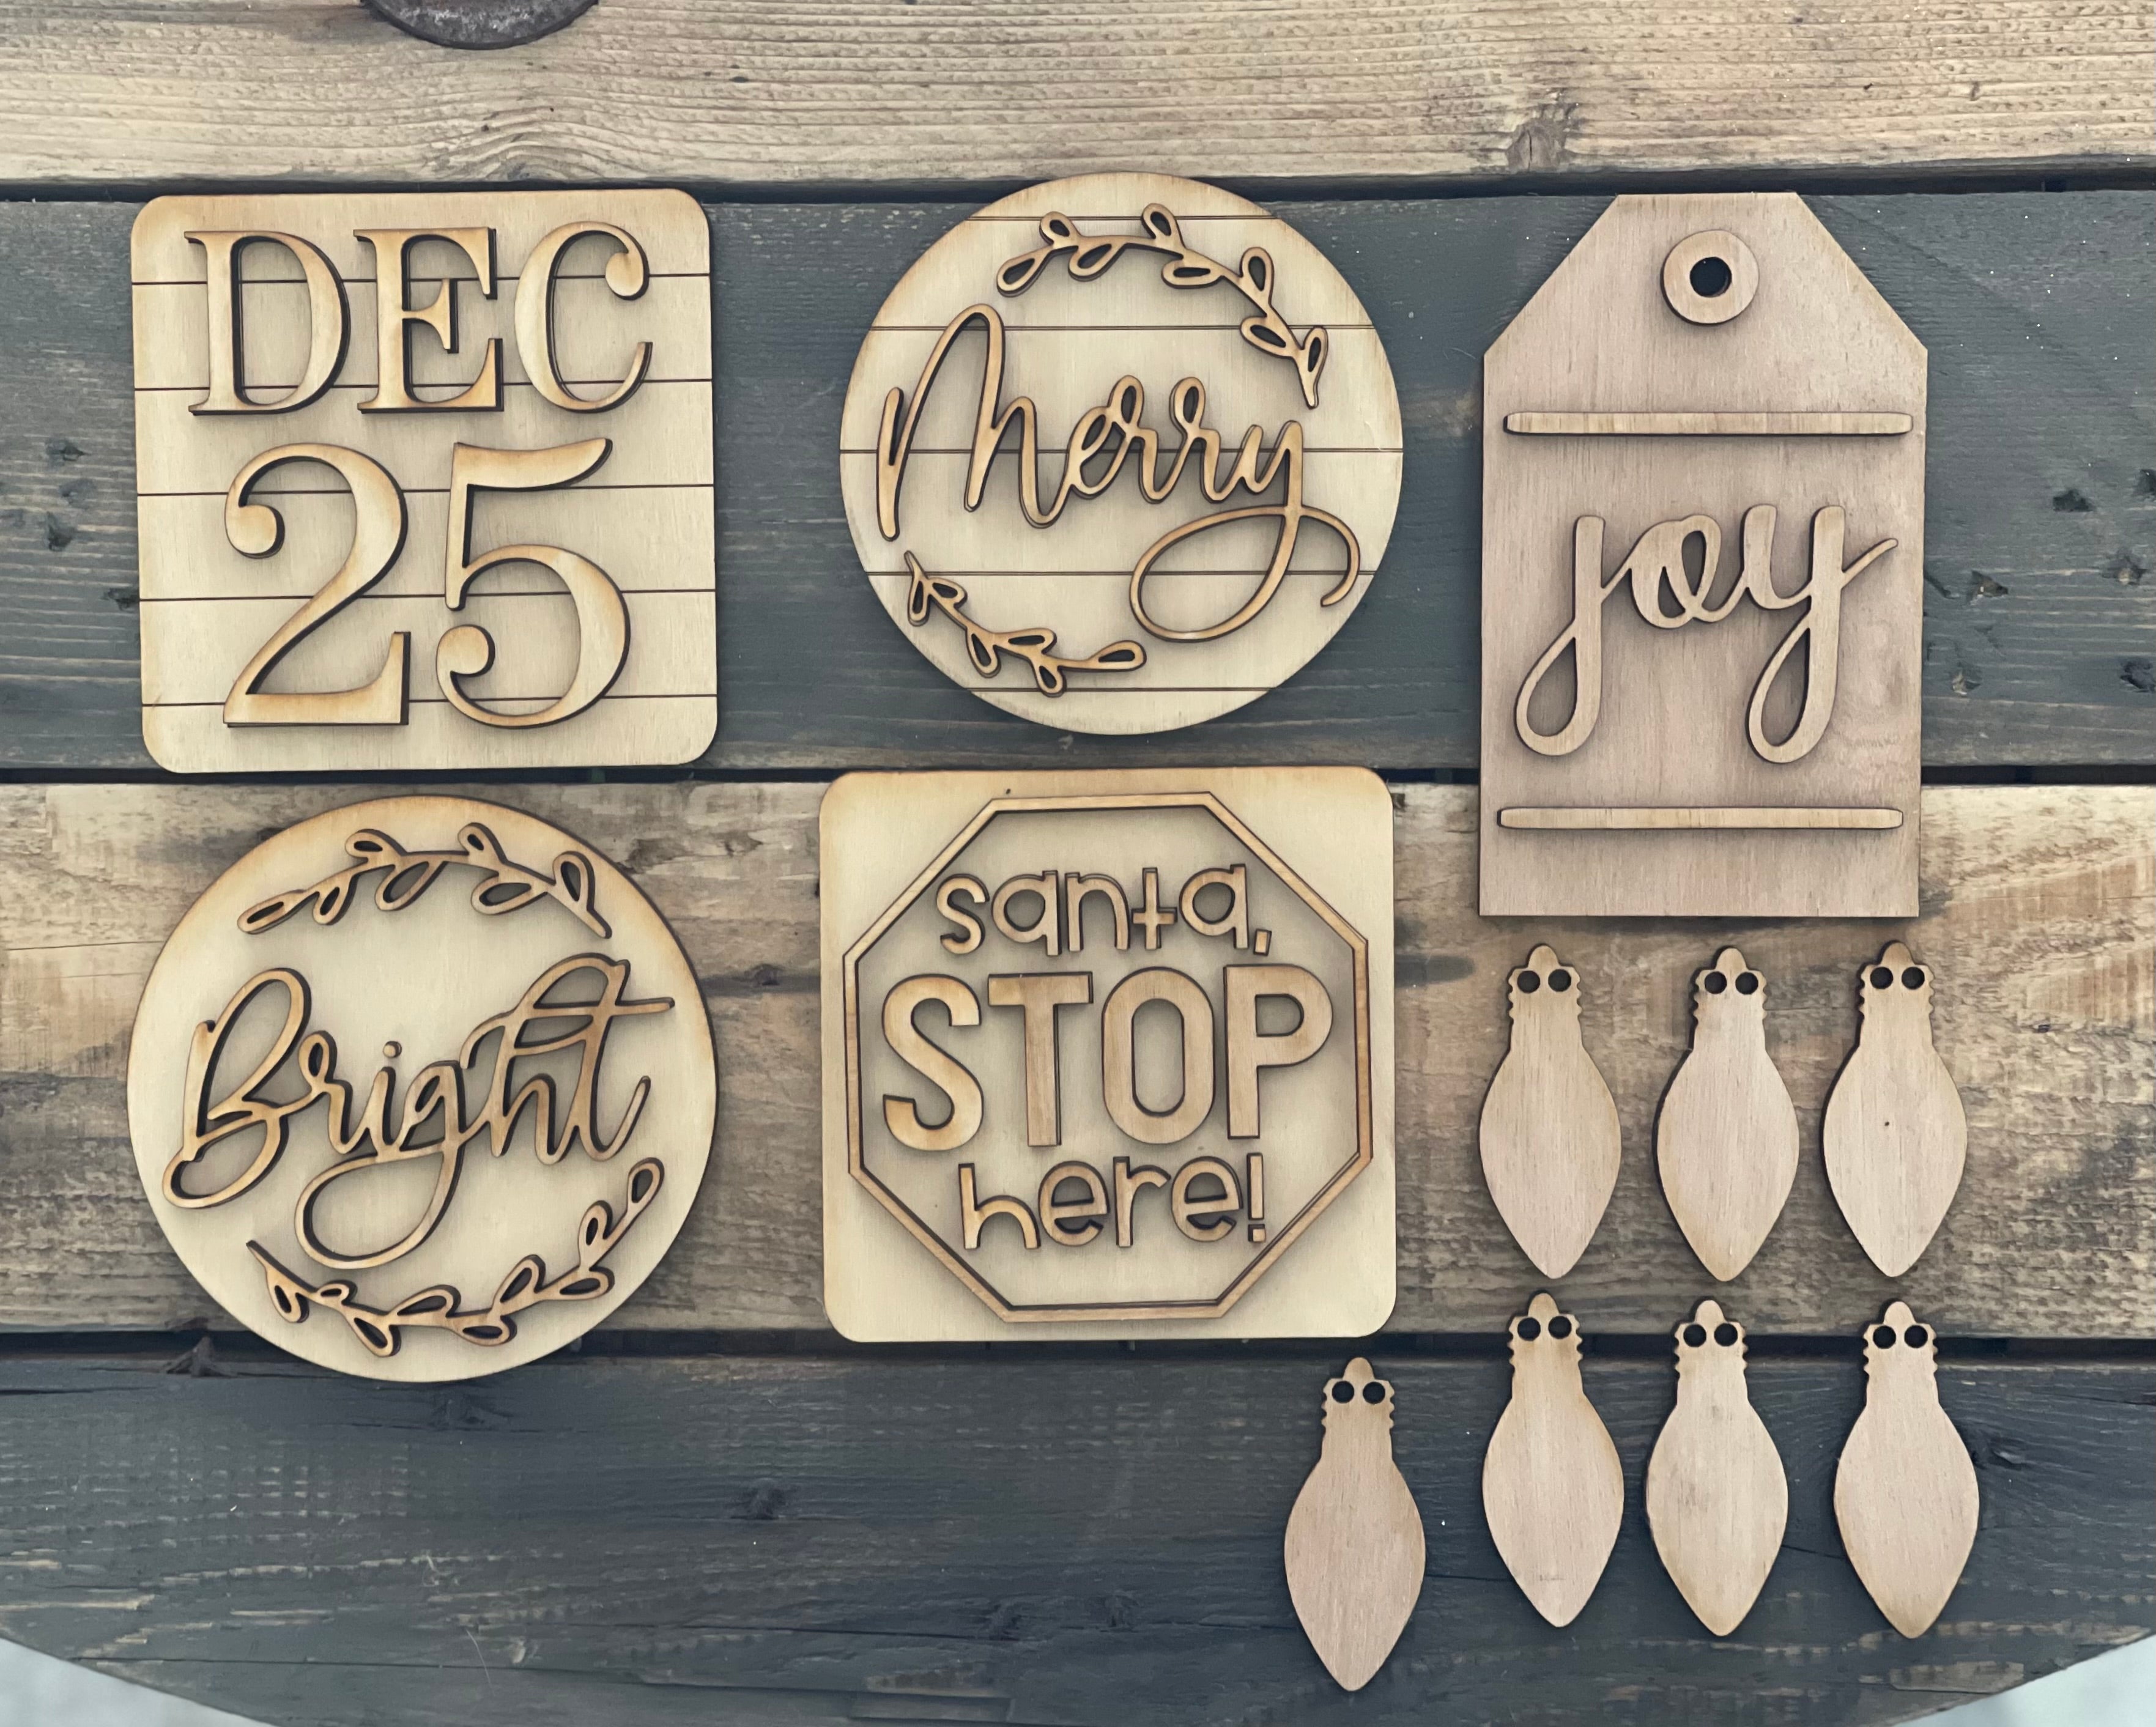 6 piece 3D Wood DIY Christmas Tiered Tray Decor Set.  Comes with (1) Shiplap Dec. 25th square sign, (2) round signs, one that says Merry and the other says Bright, (1) square santa stop here sign, a gift tag that says JOY, and Christmas light banner garland.  Twine will be provided for the gift tag and light garland.  Kits can be purchased with or without paint and accessories. 